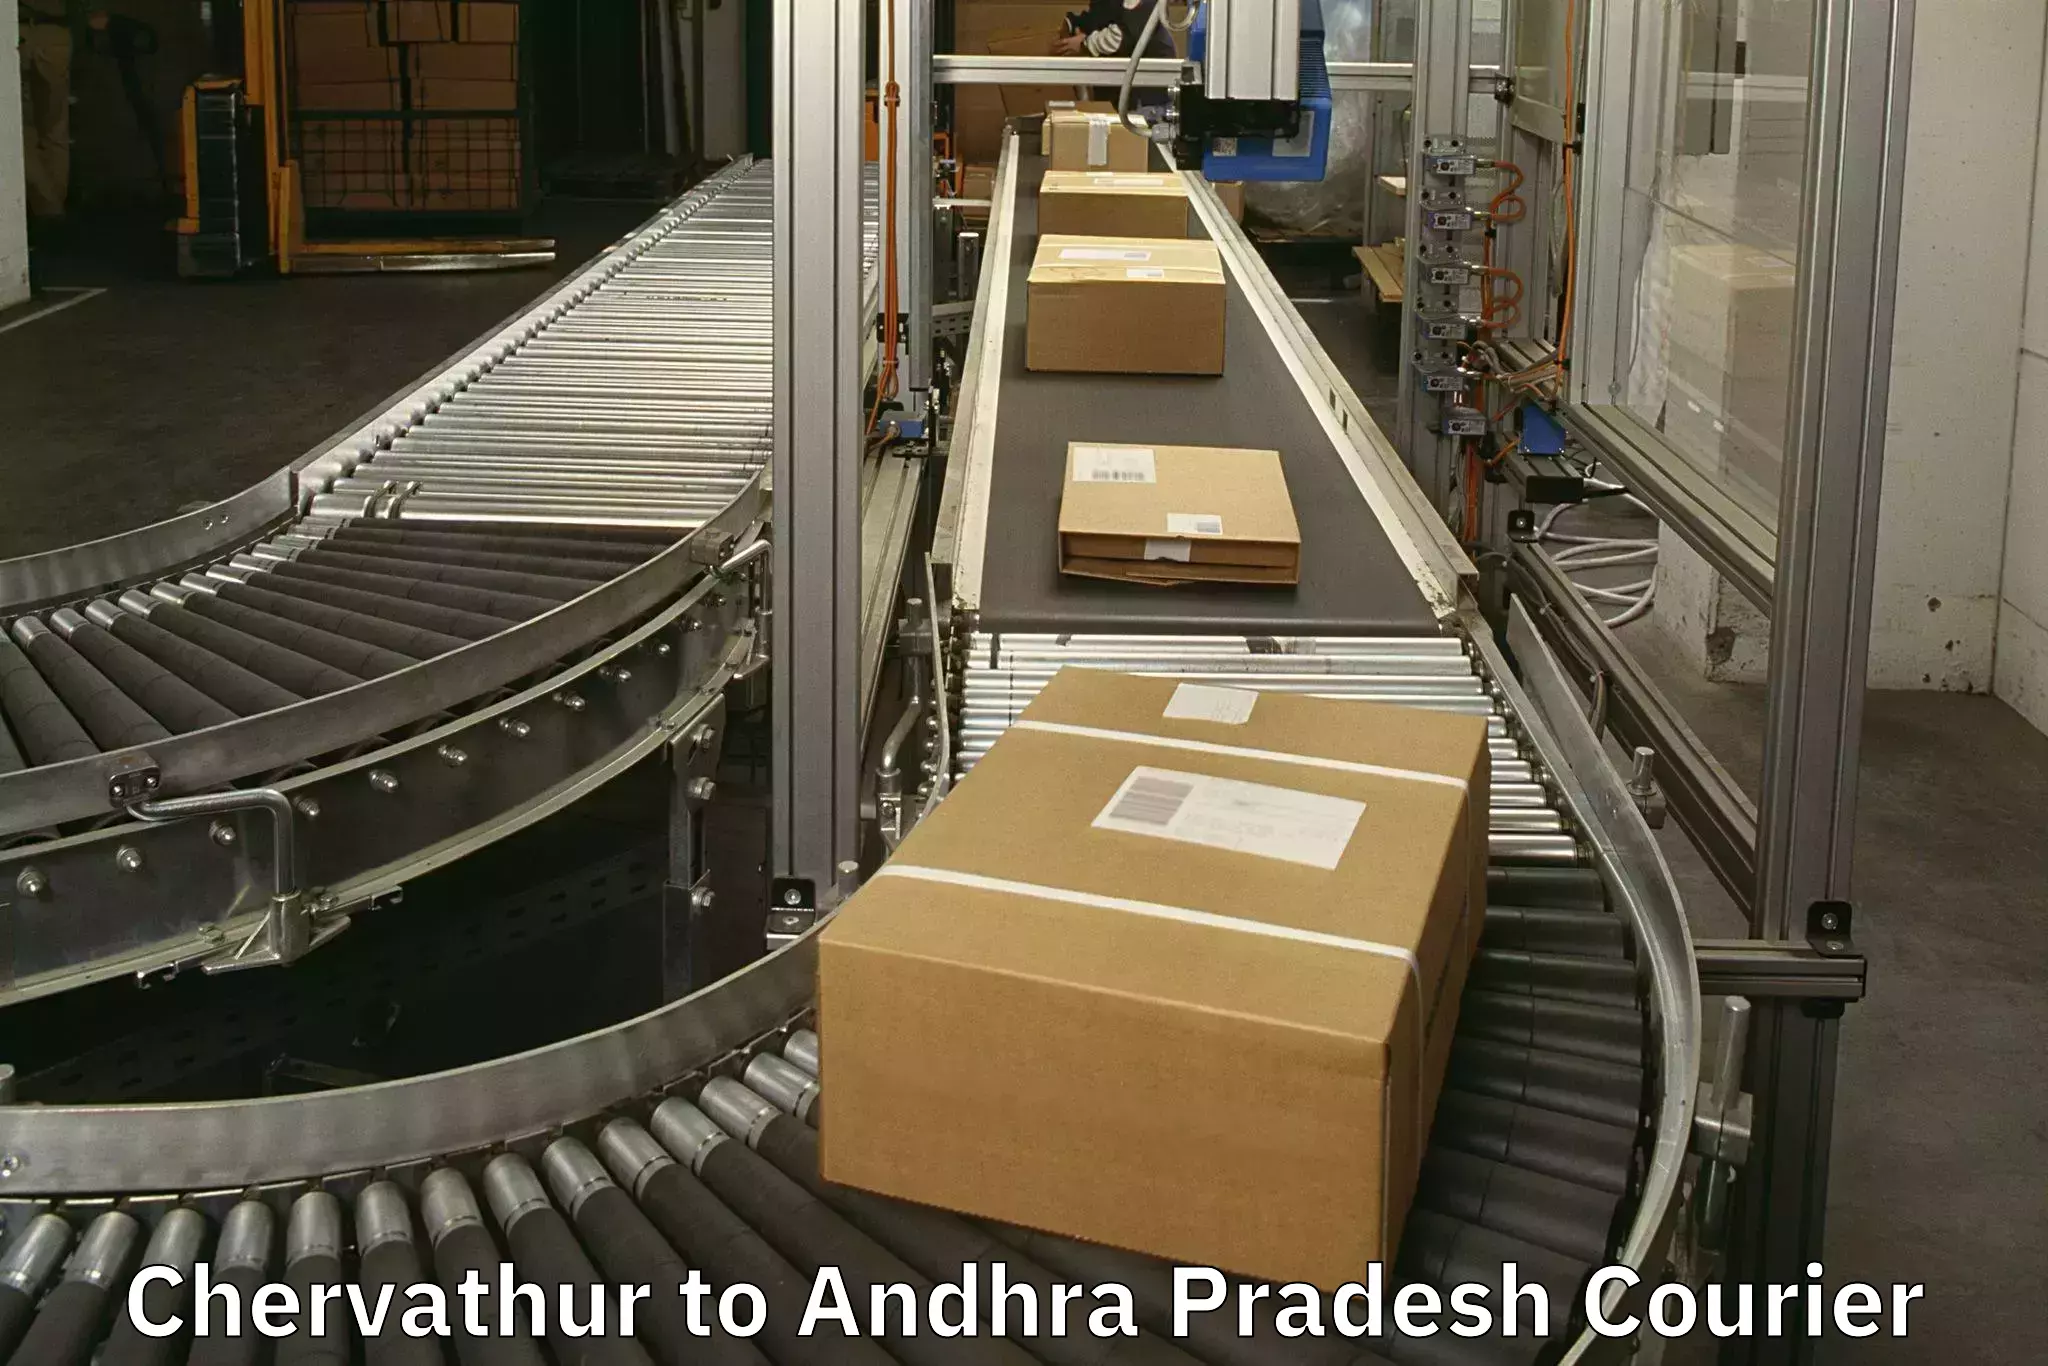 Luggage transport consulting Chervathur to Andhra Pradesh